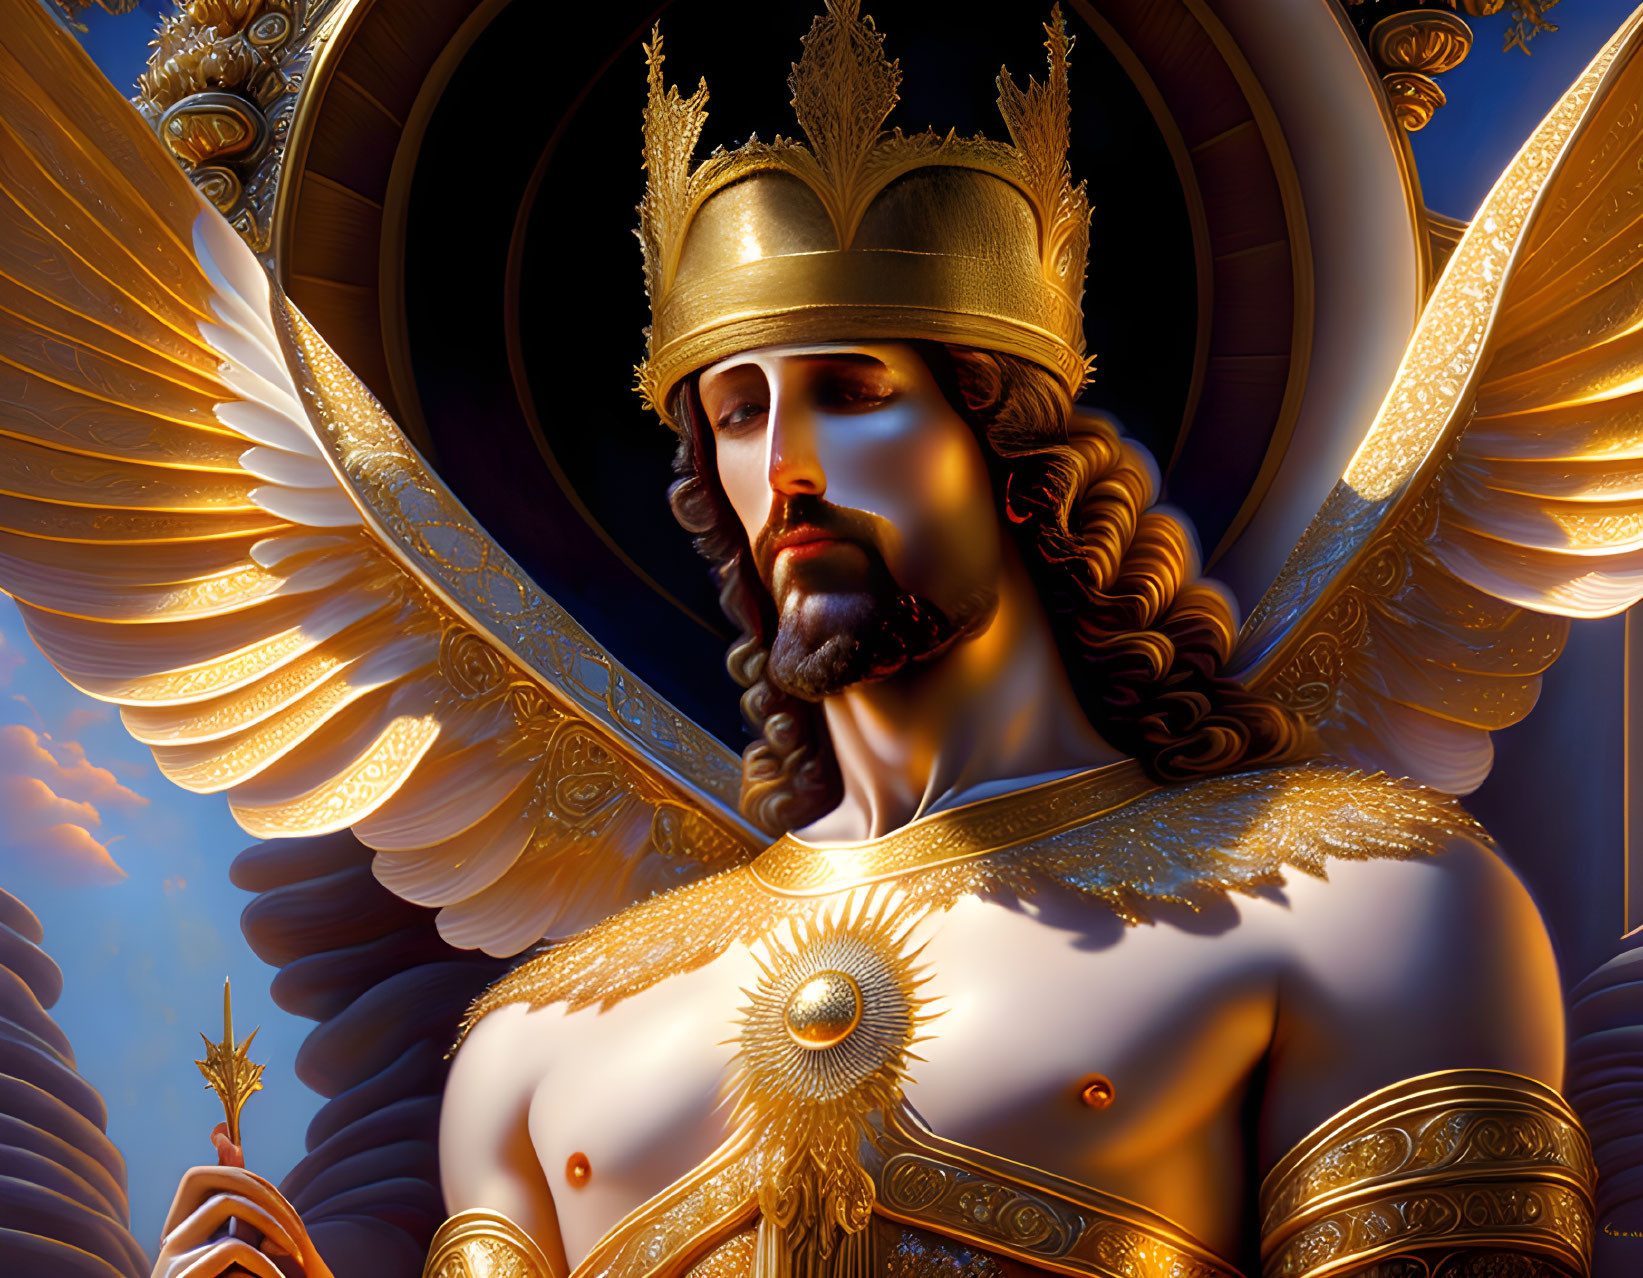 Regal angelic king in golden armor and crown with scepter on glowing backdrop